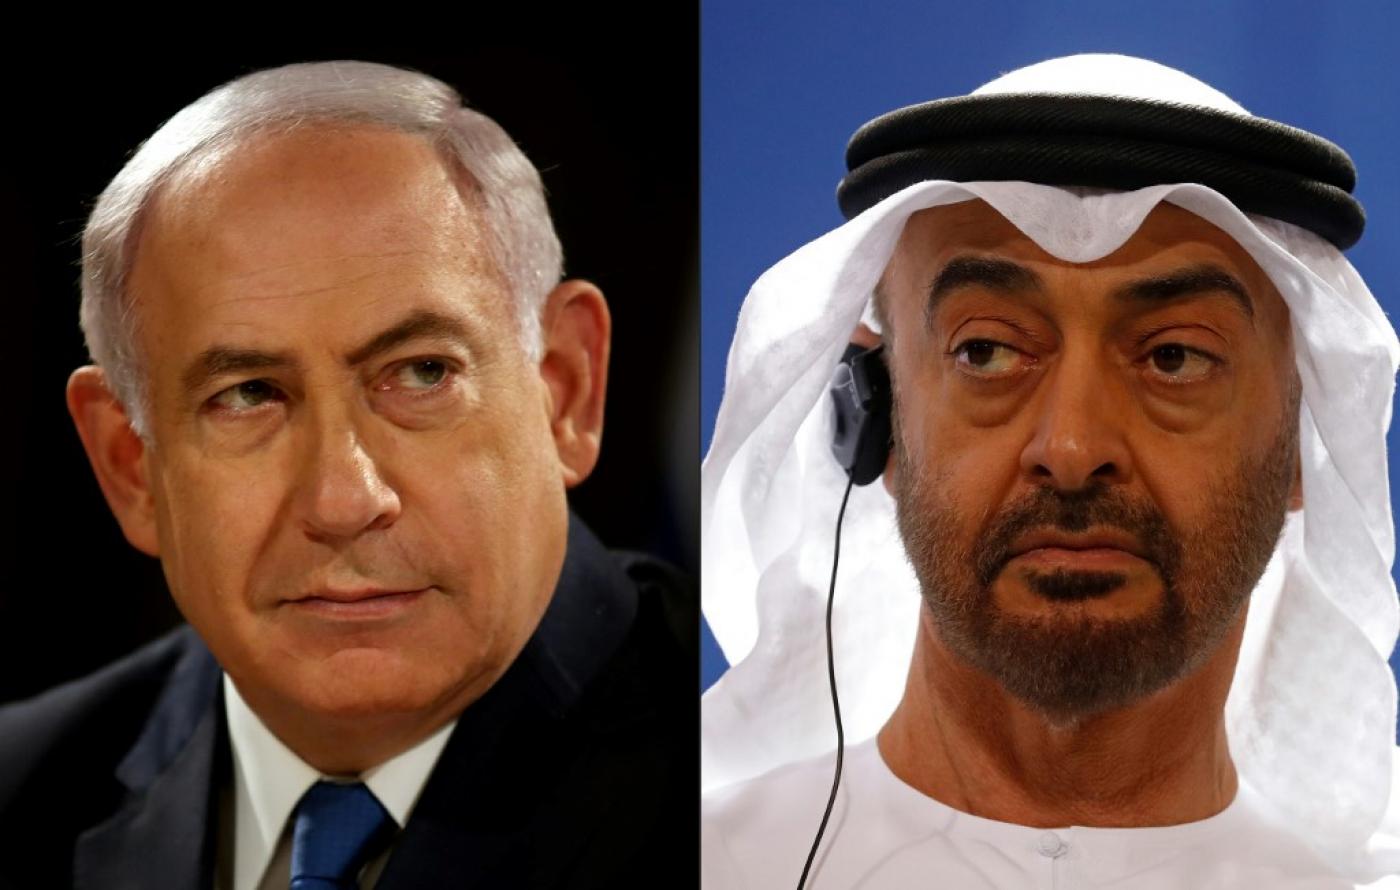 Israel-UAE deal: The Emiratis are now under Israel's thumb